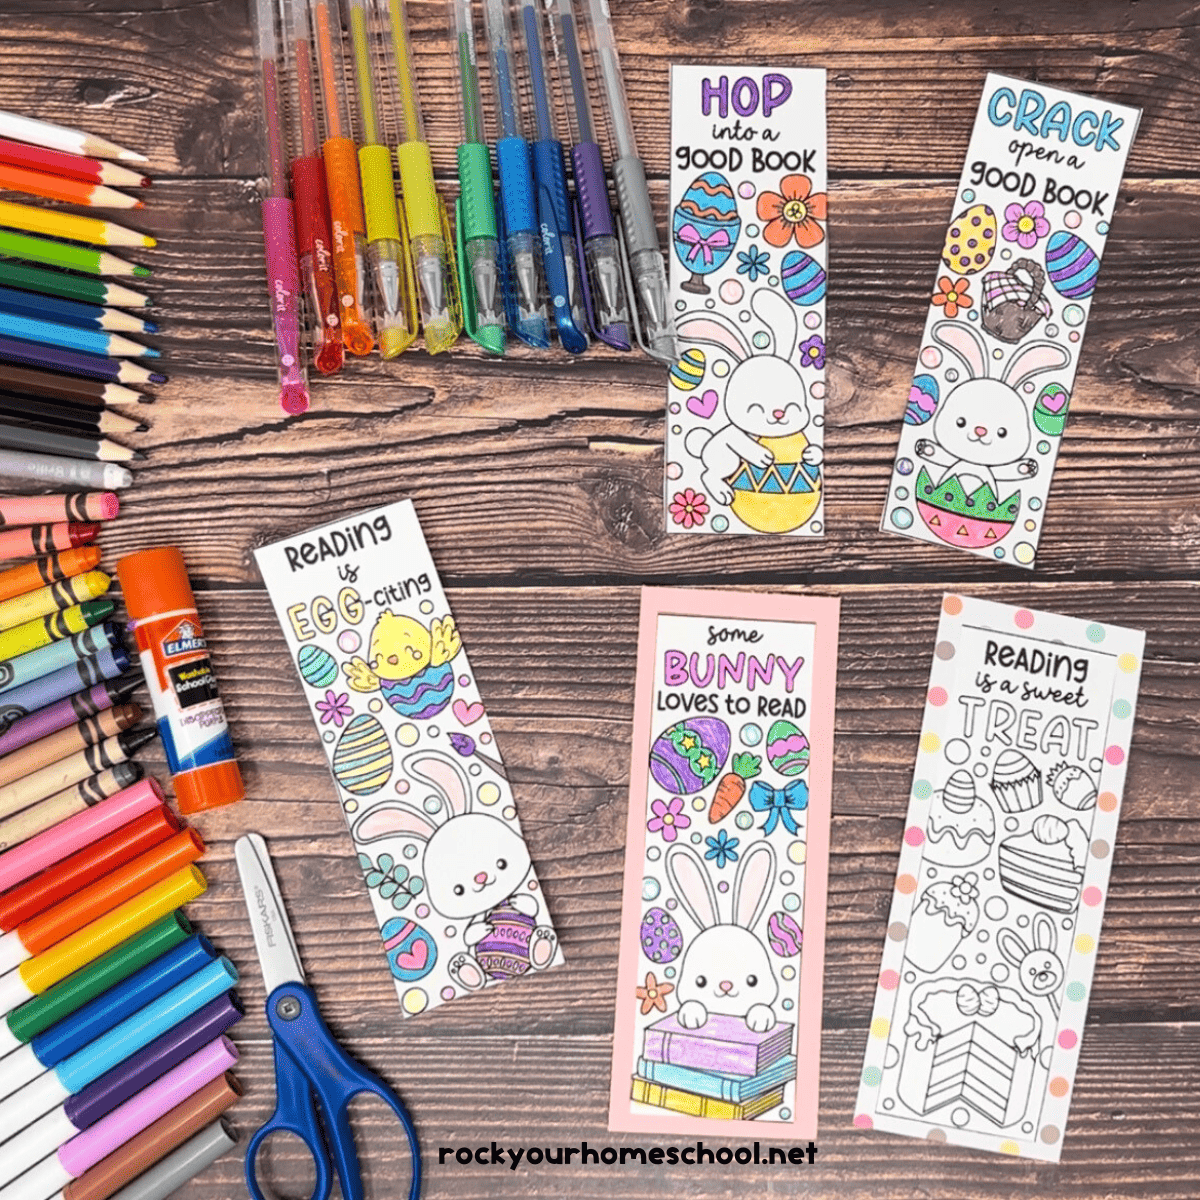 Examples of free printable Easter bookmarks to color with gel pens, color pencils, crayons, markers, scissors, and glue stick.